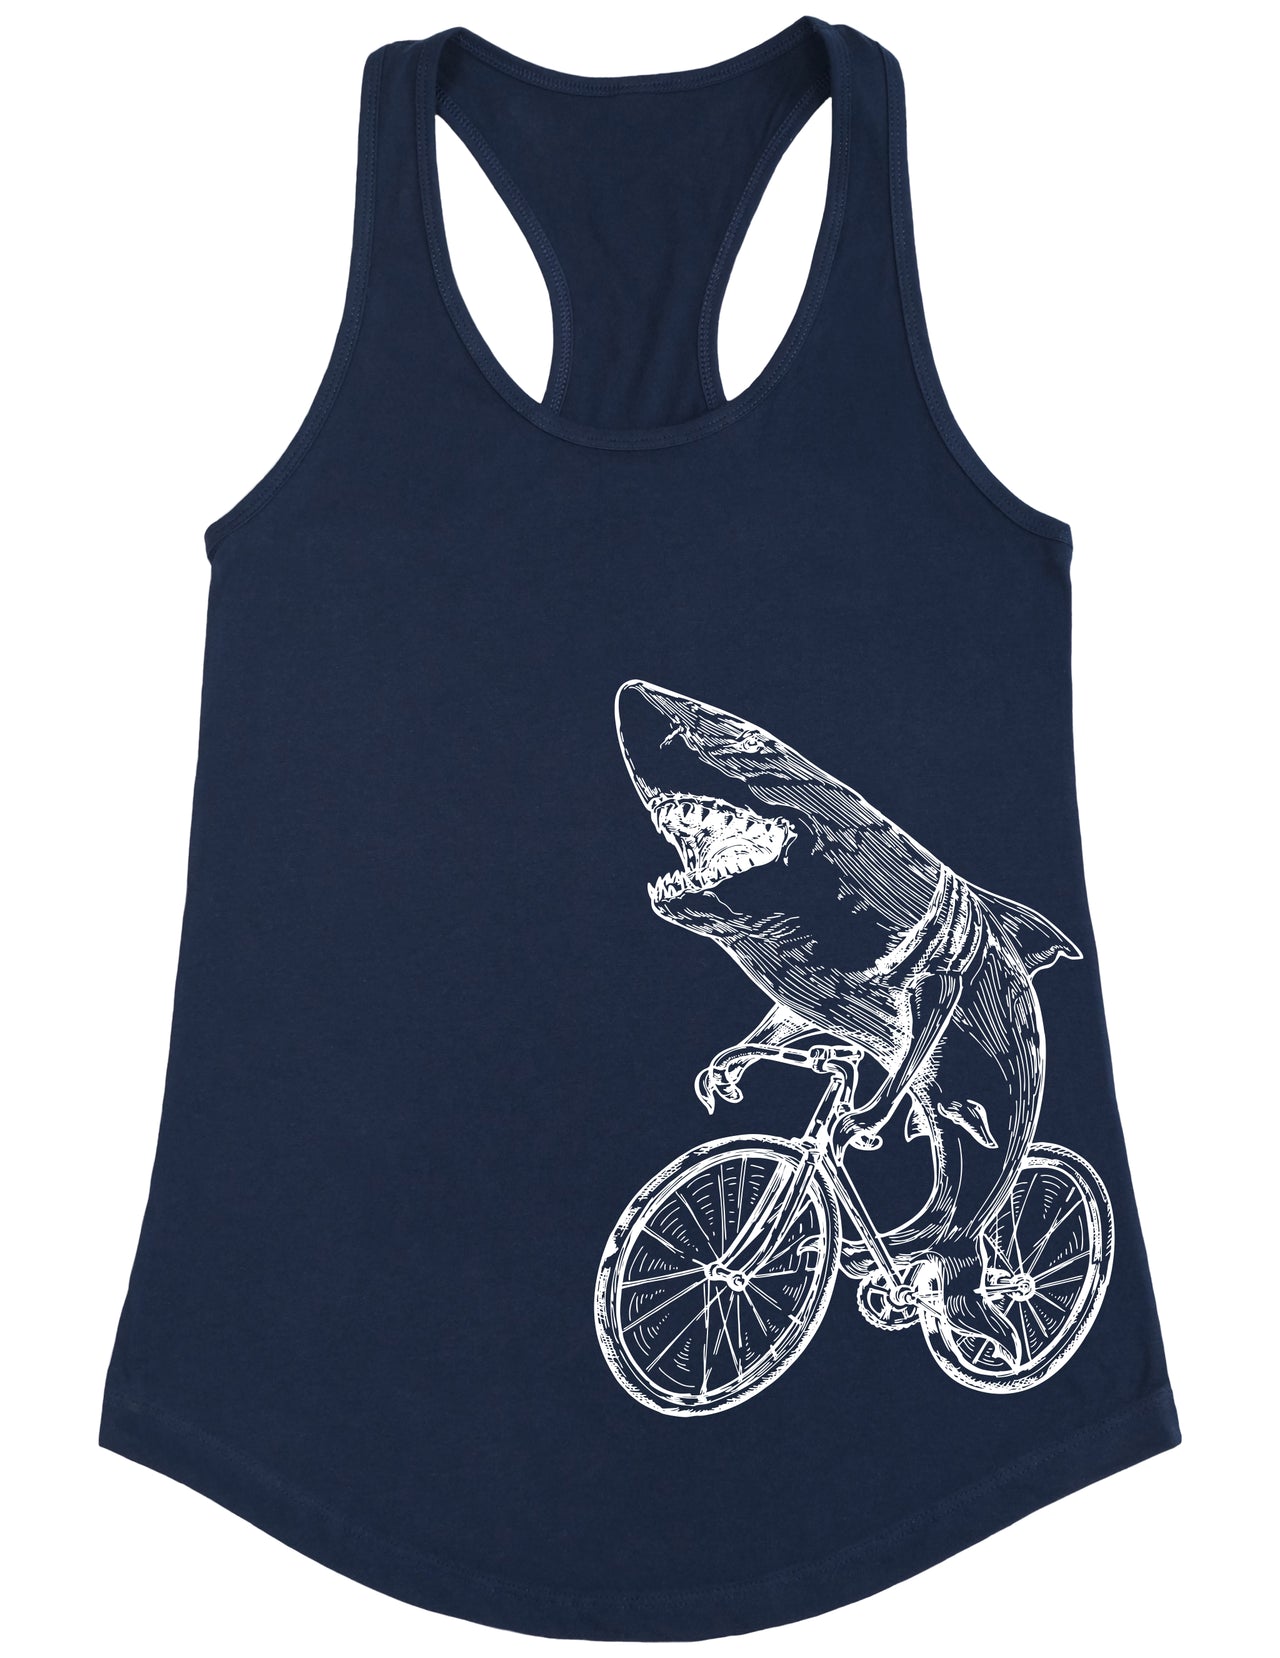 SEEMBO Shark Cycling Bicycle Women's Poly-Cotton Tank Top Side Print